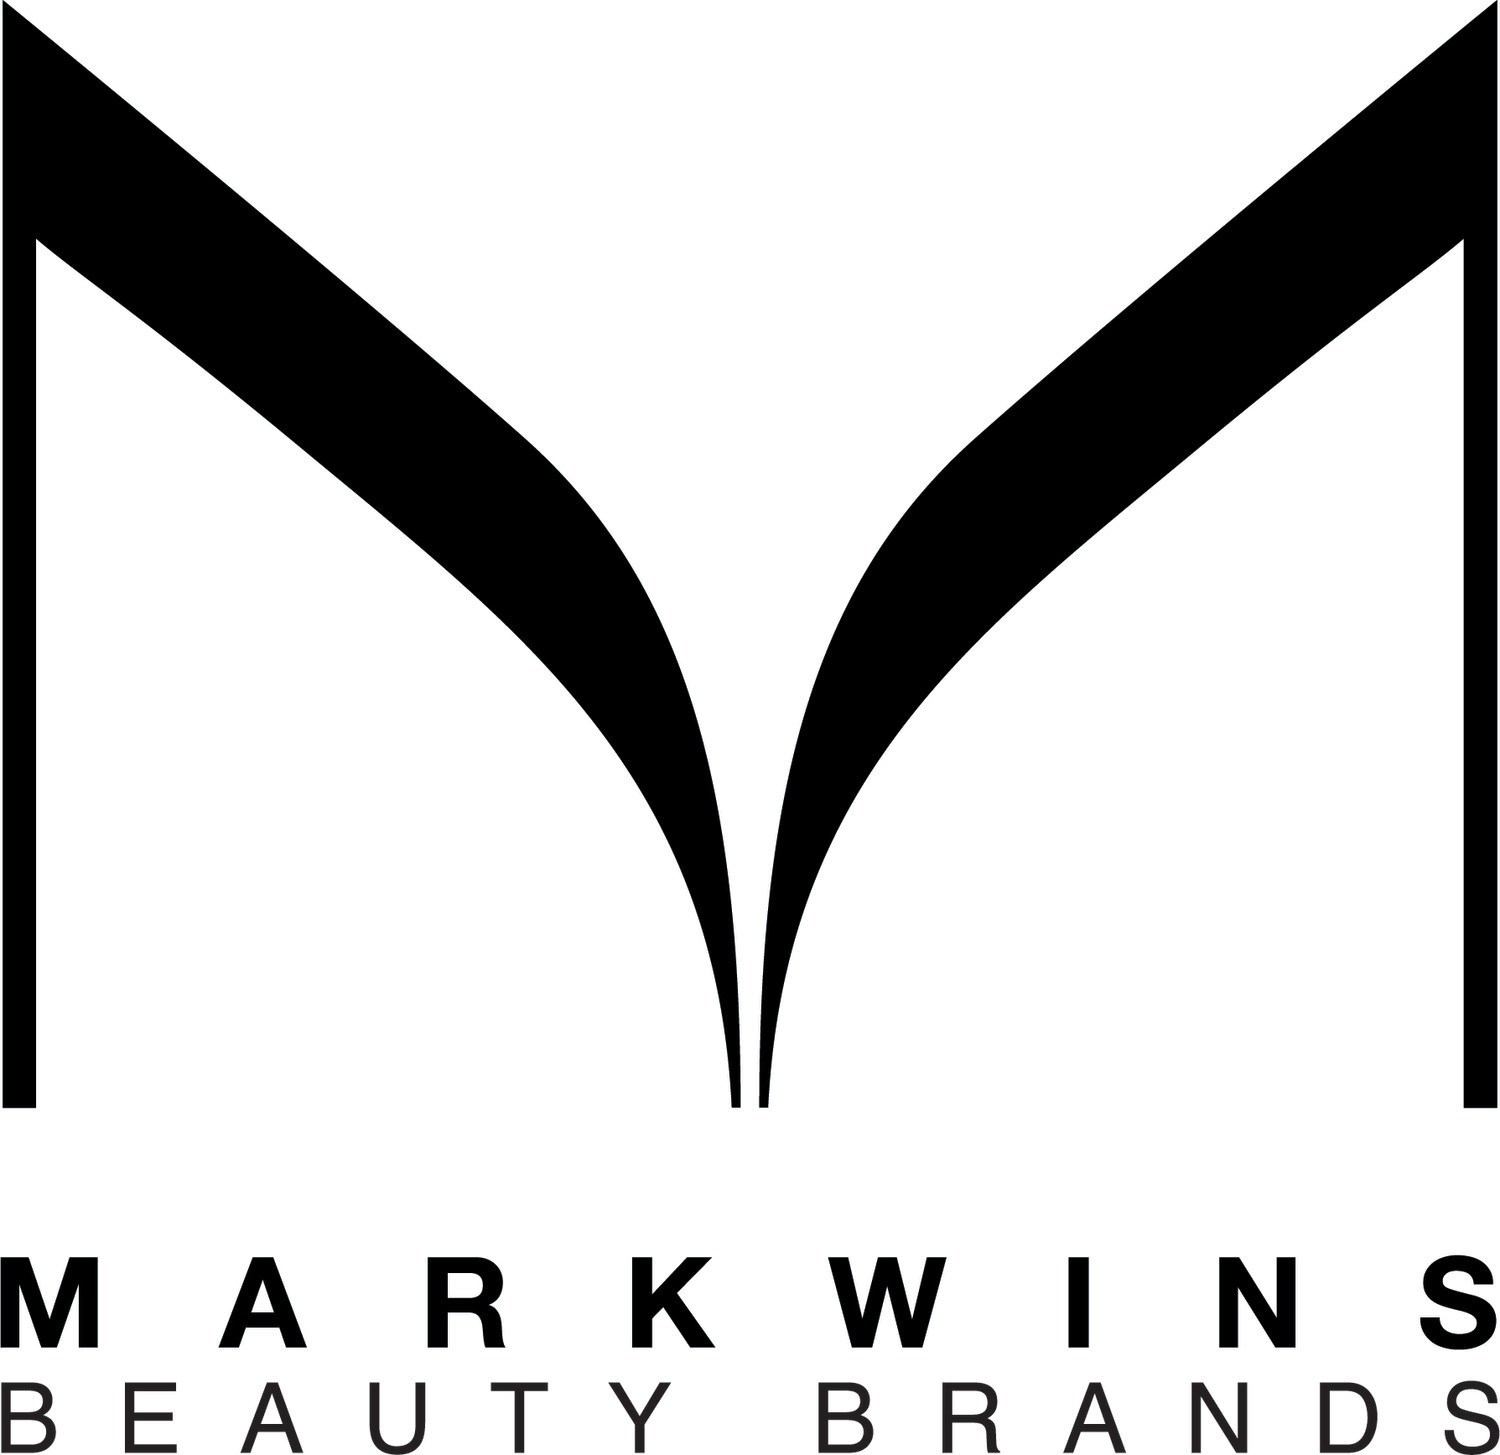 Stefano Curti appointed as Markwins Beauty Brands Global President